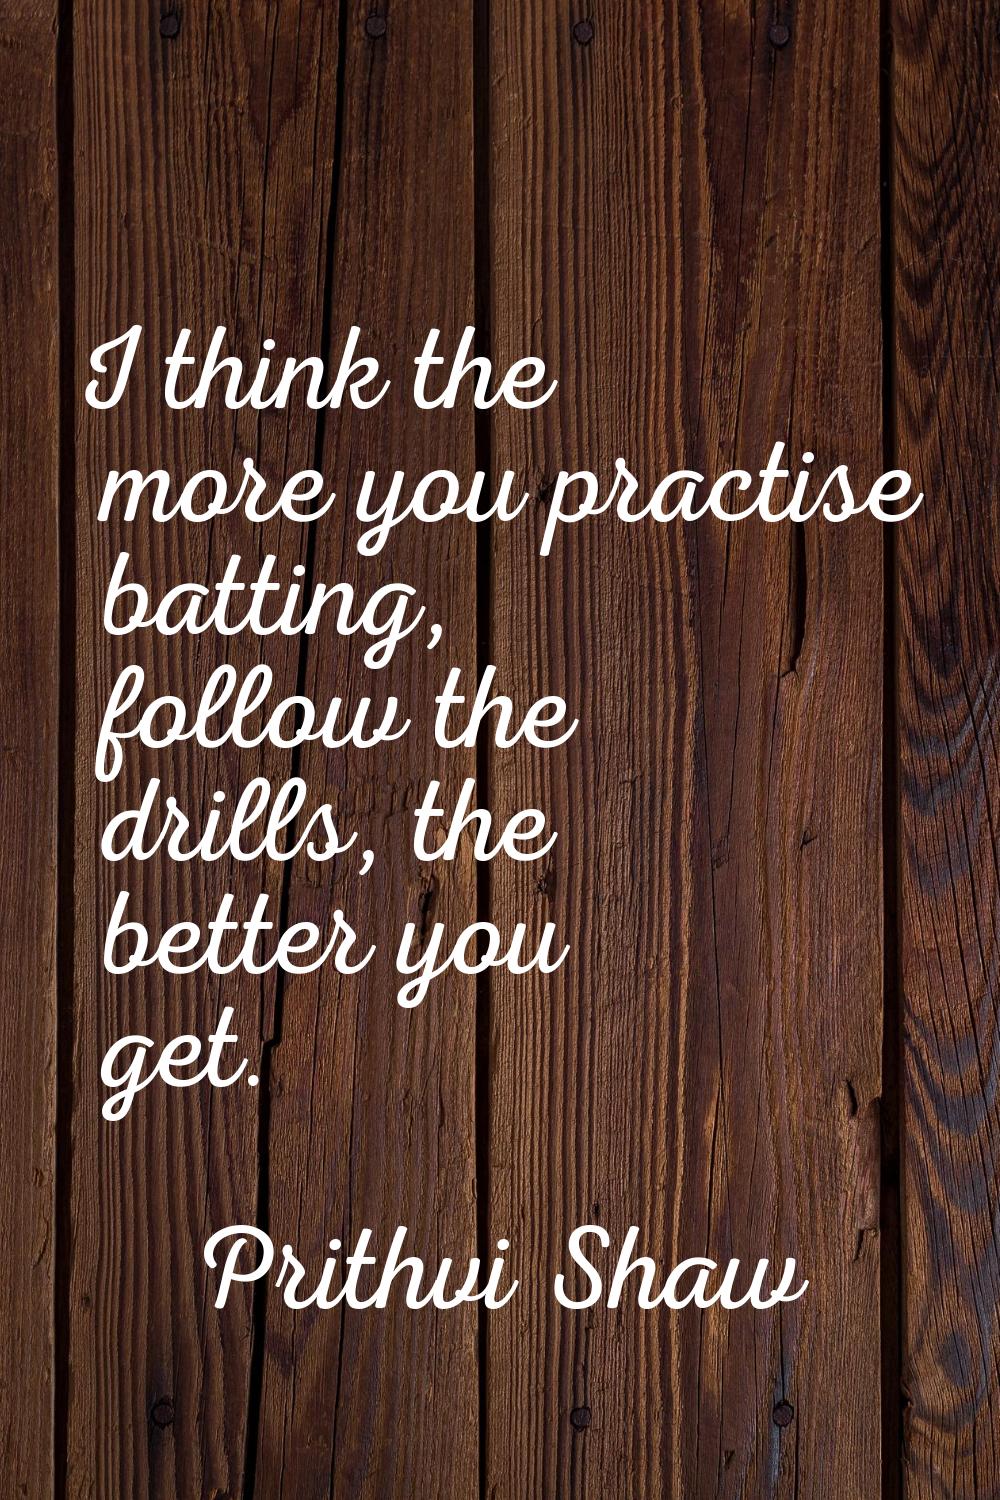 I think the more you practise batting, follow the drills, the better you get.